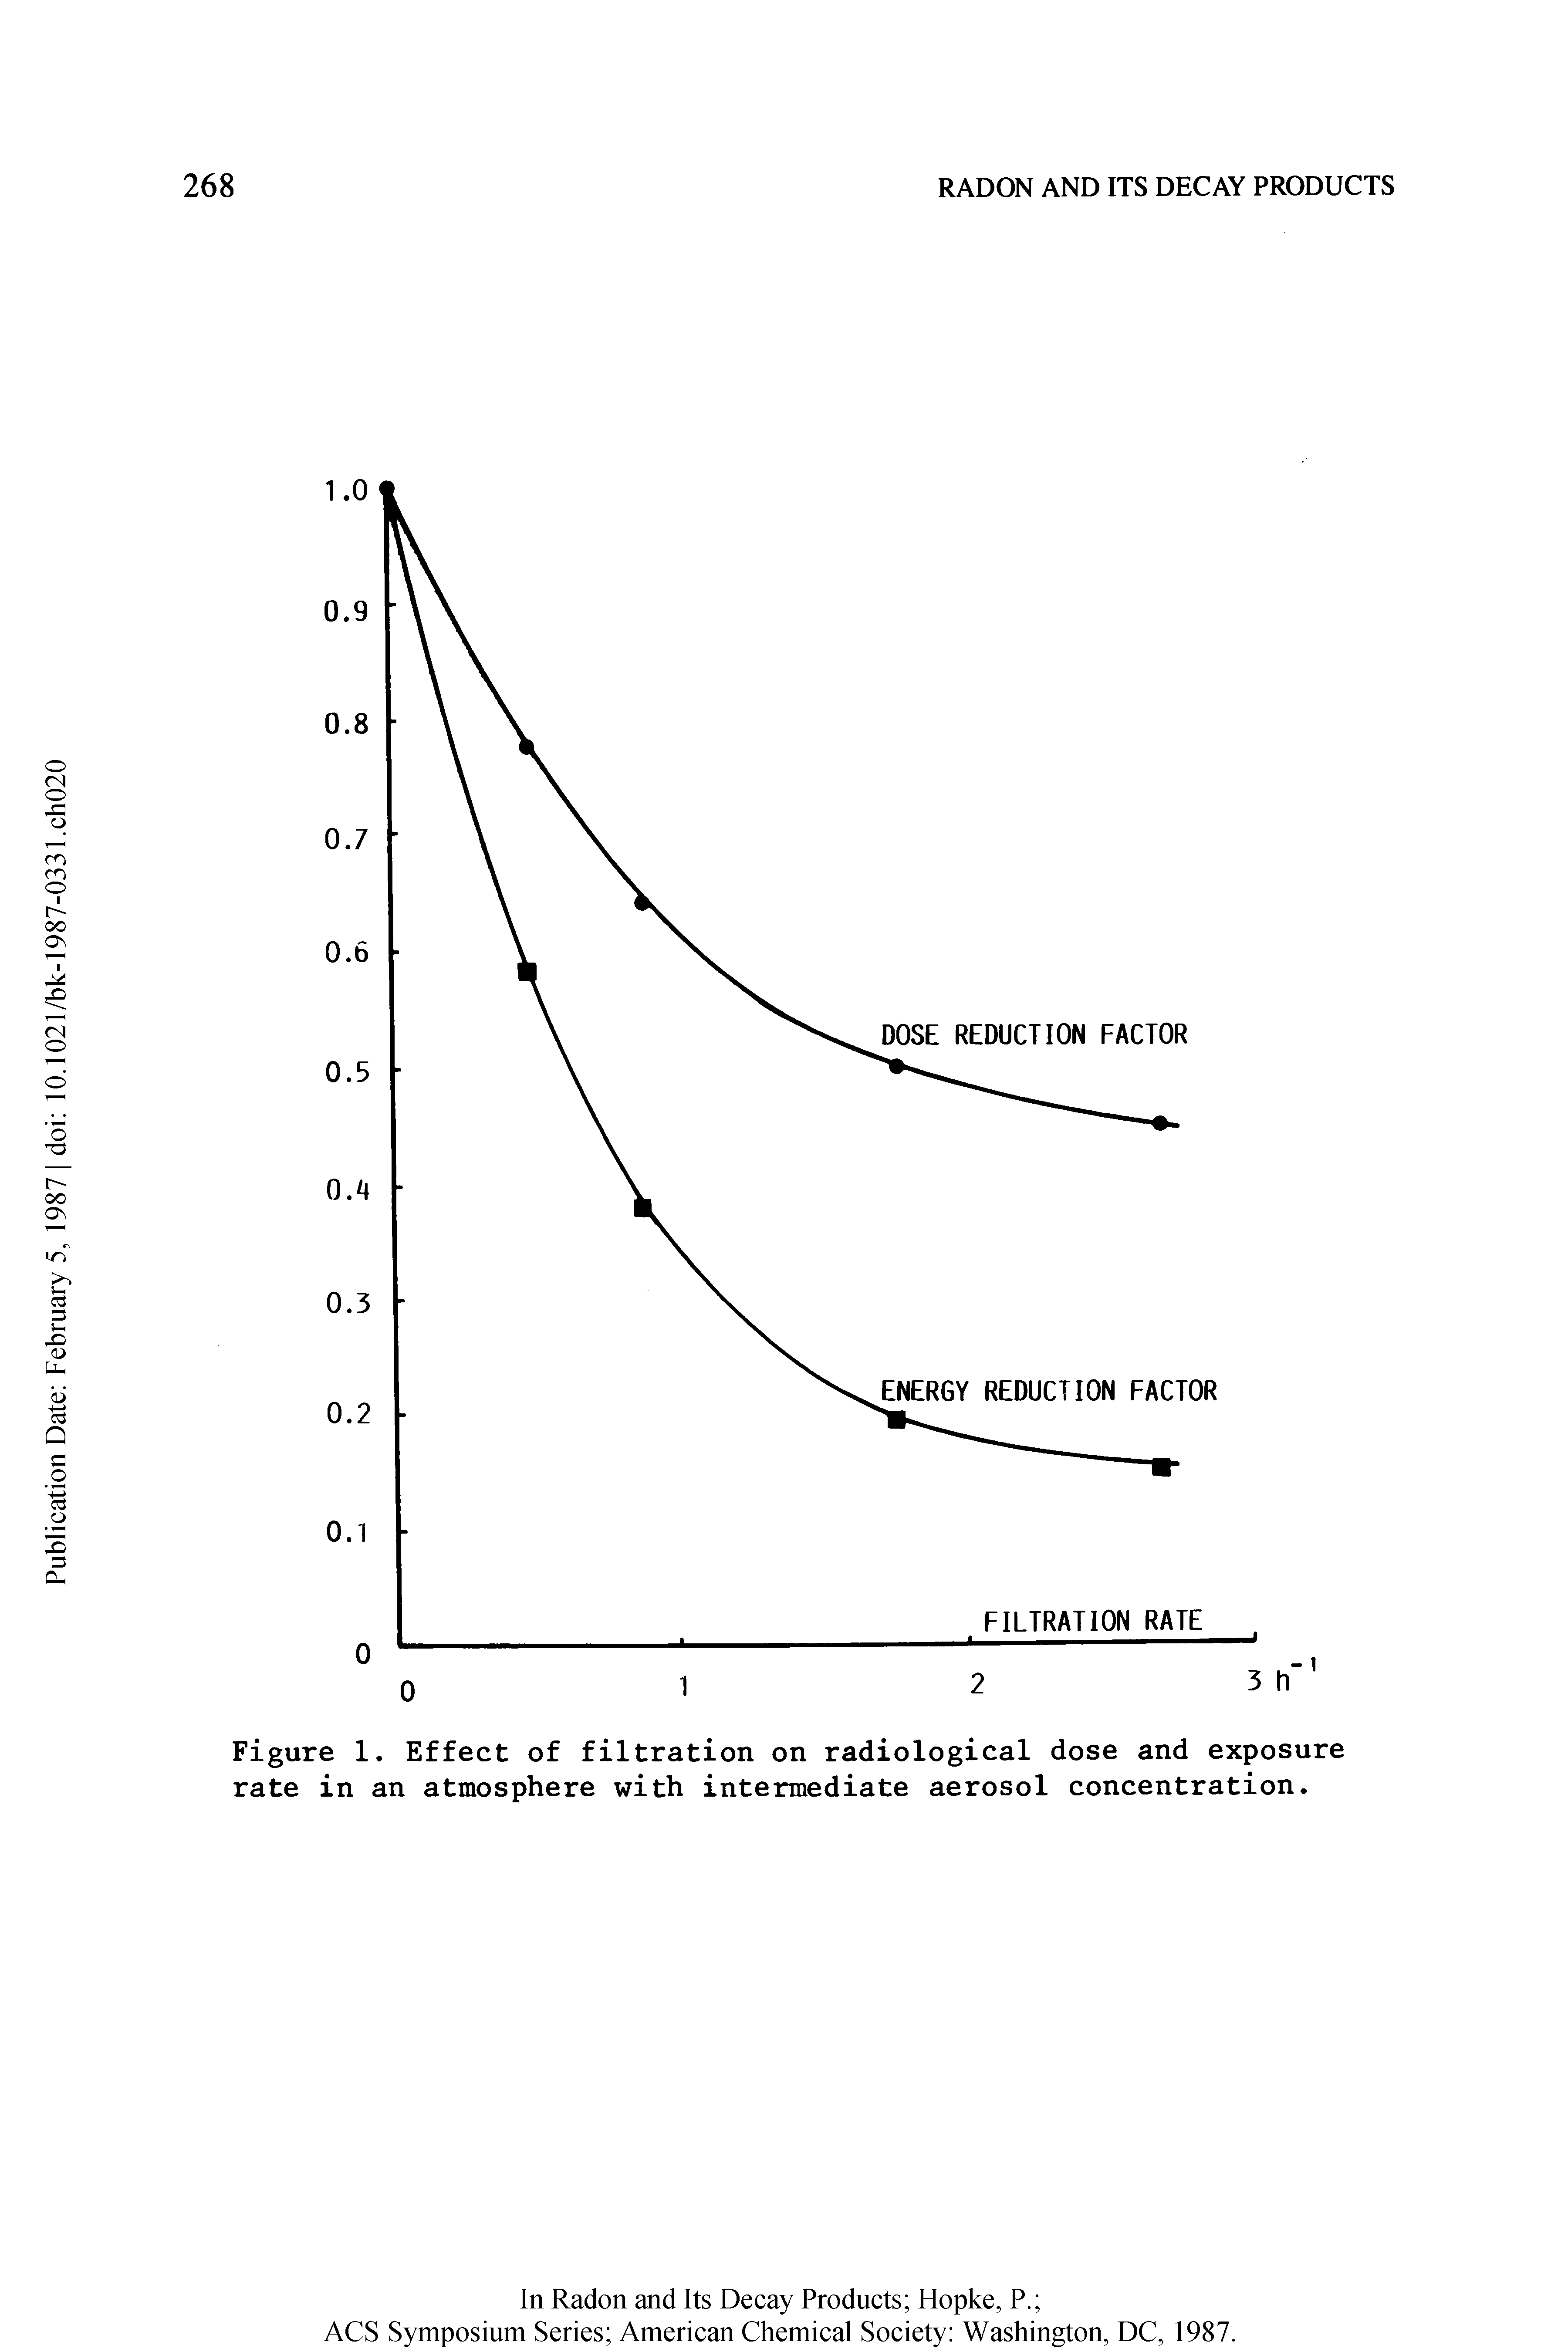 Figure 1. Effect of filtration on radiological dose and exposure rate in an atmosphere with intermediate aerosol concentration.